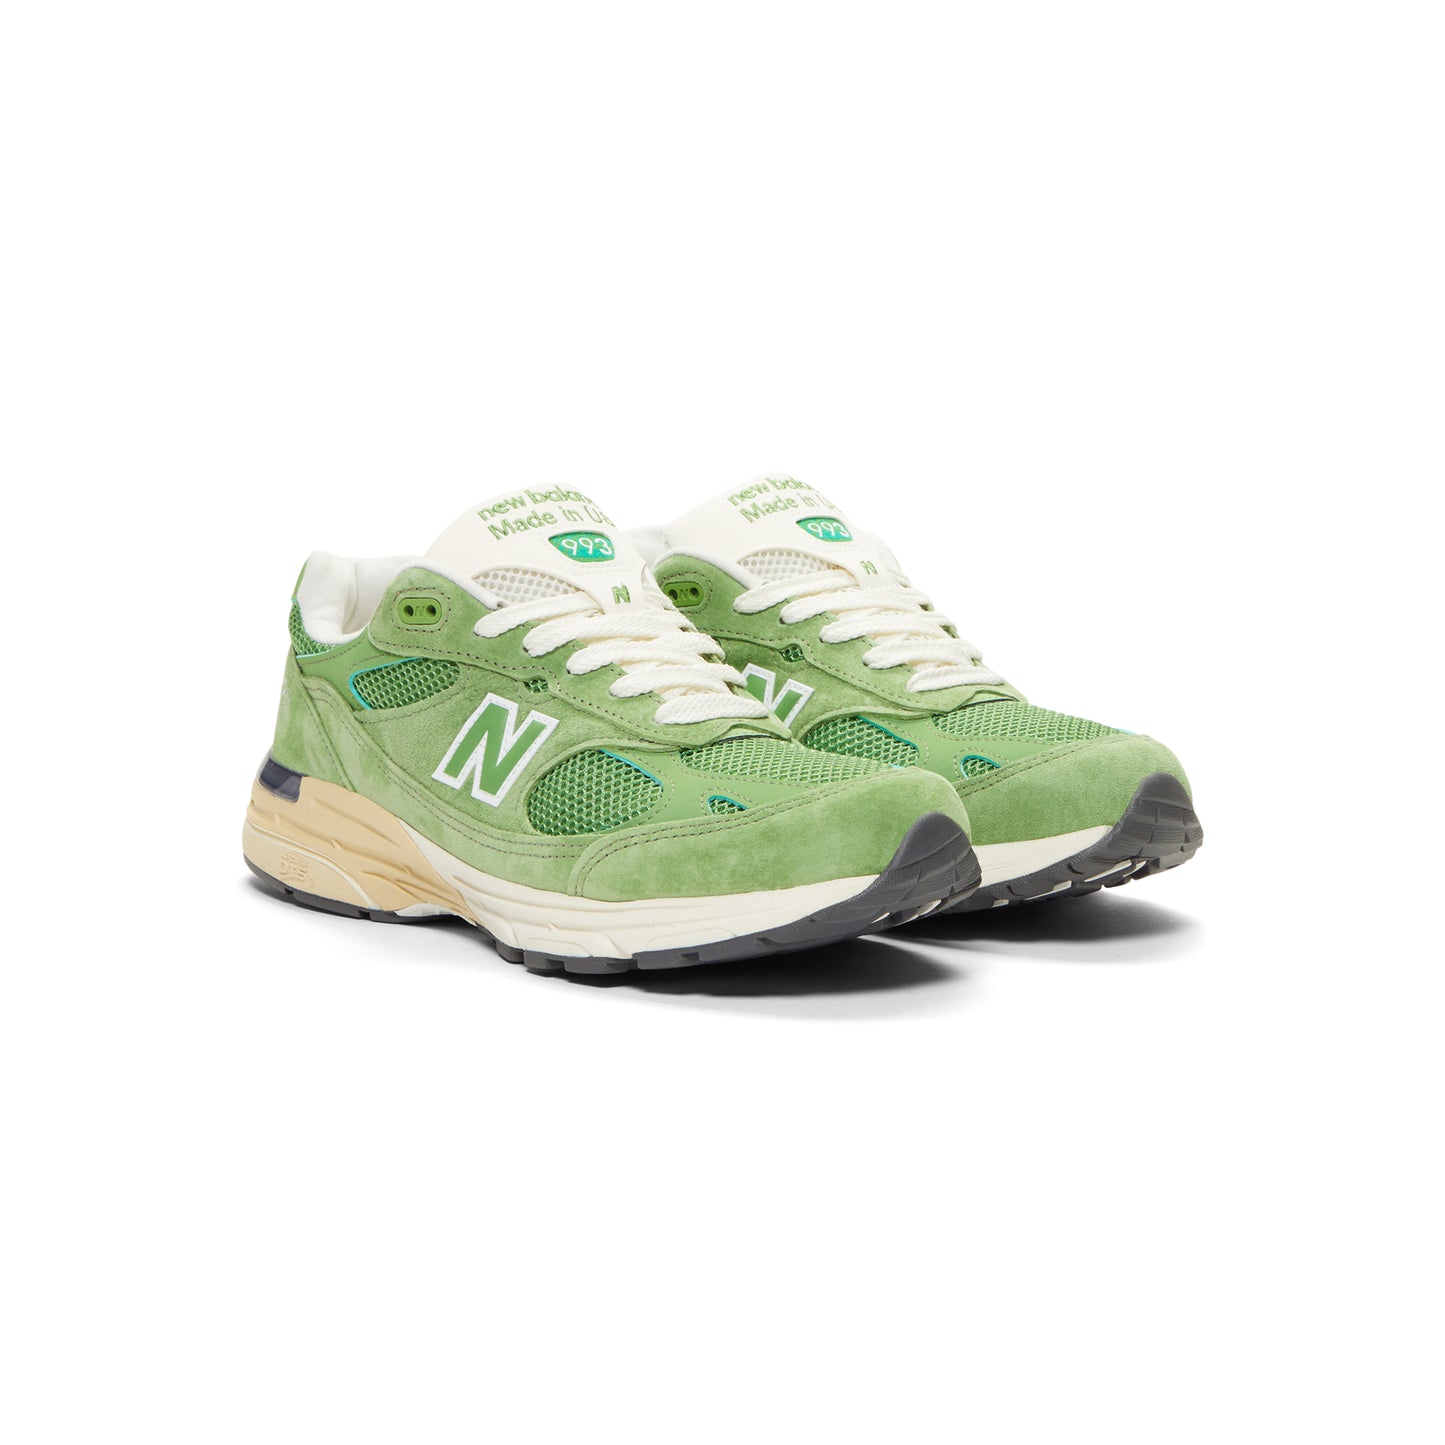 New Balance Made in USA 993 (Chive)